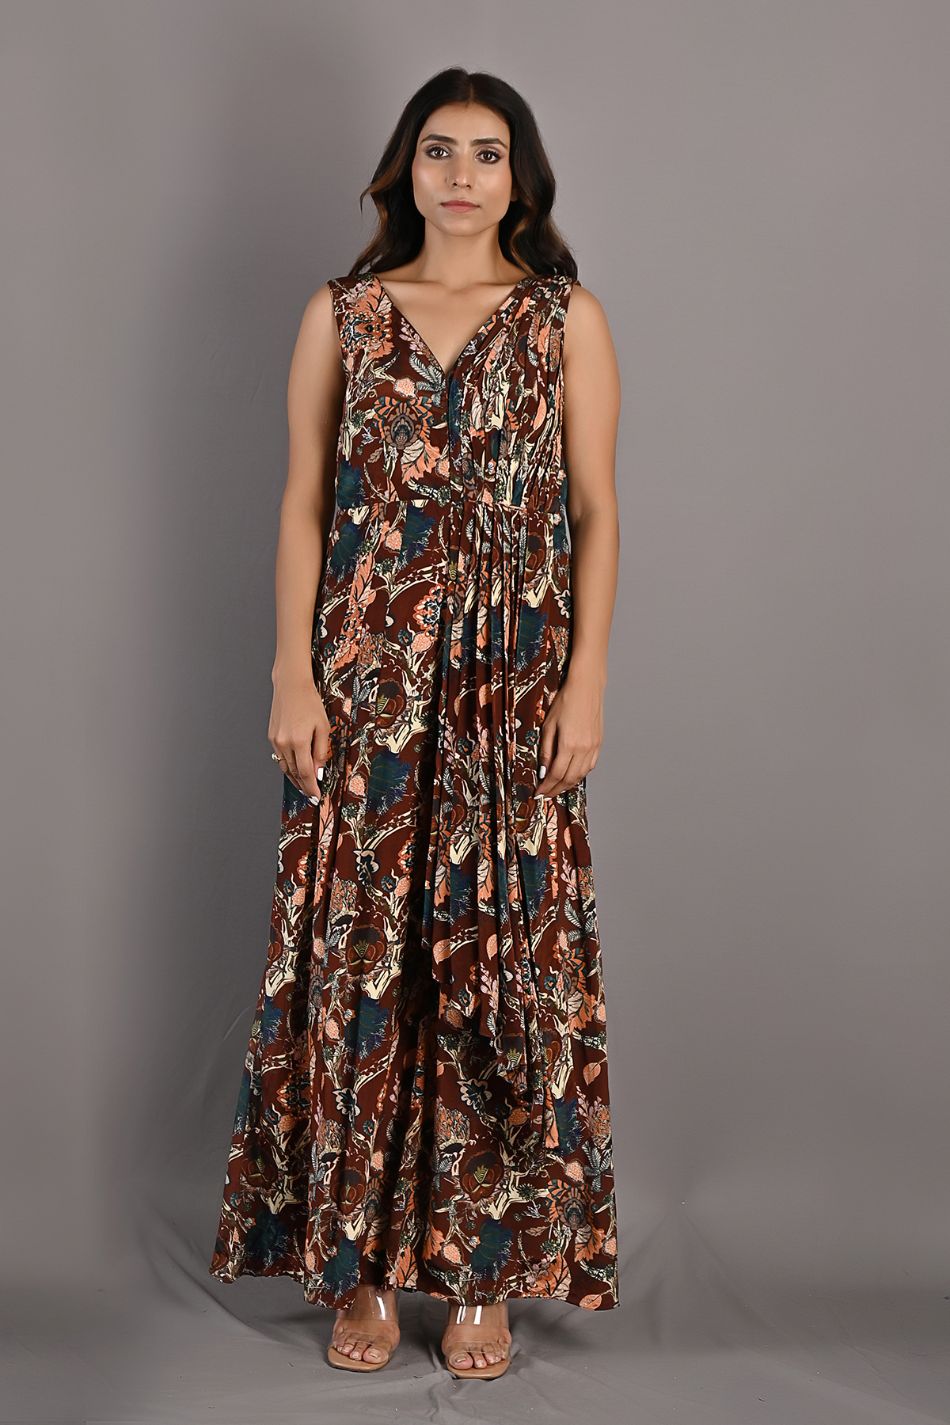 Fern- Printed Jumpsuit With a Drape Attached